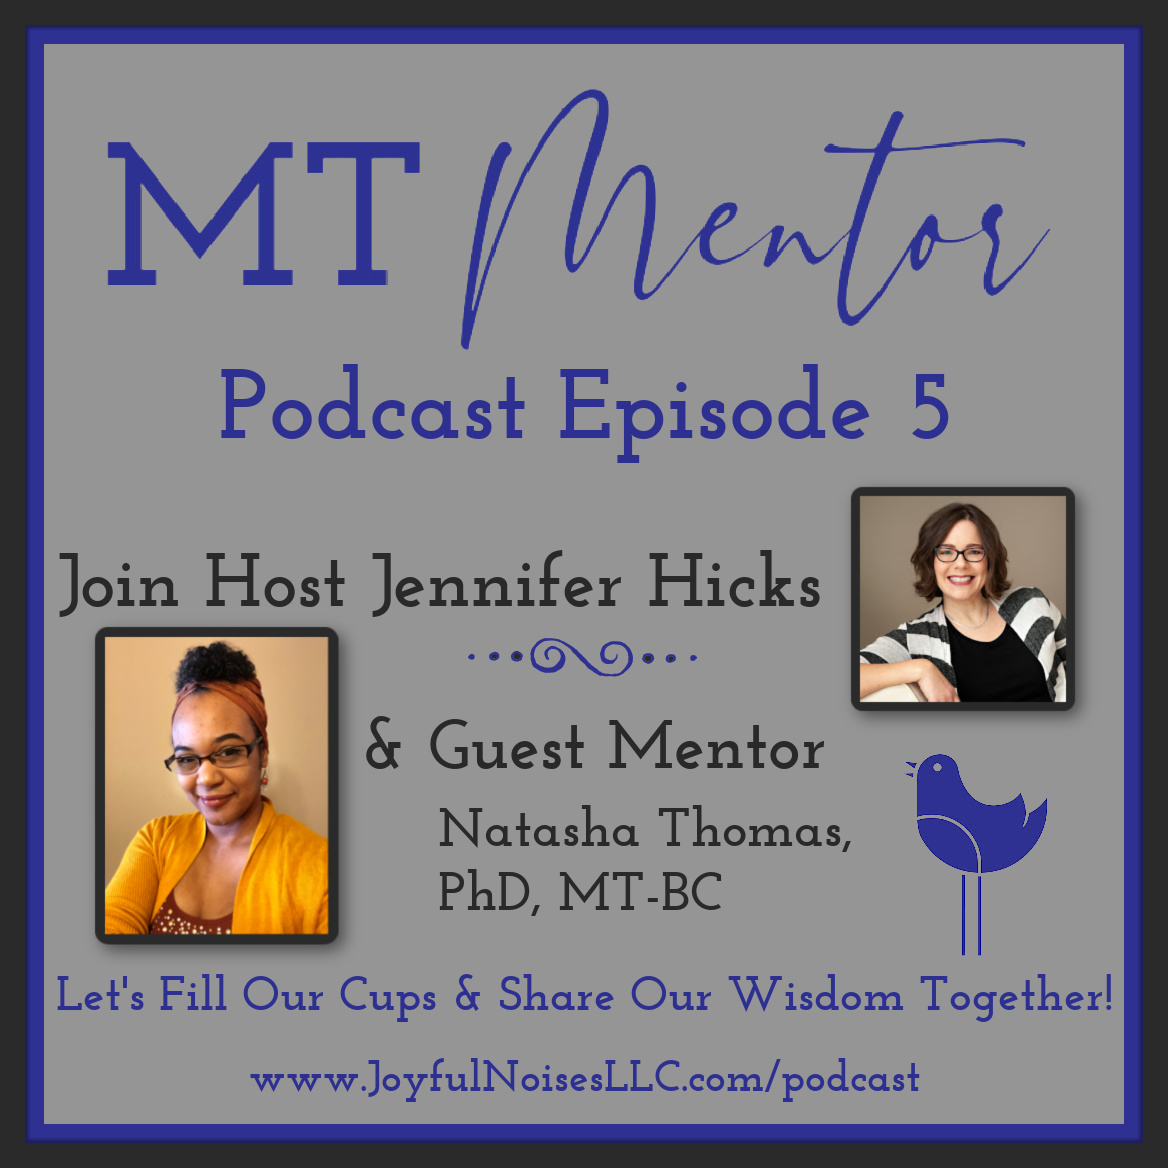 Headshots of host Jennifer Hicks and guest mentor Natasha Thomas, PhD, MT-BC with podcast title, tagline, and web address